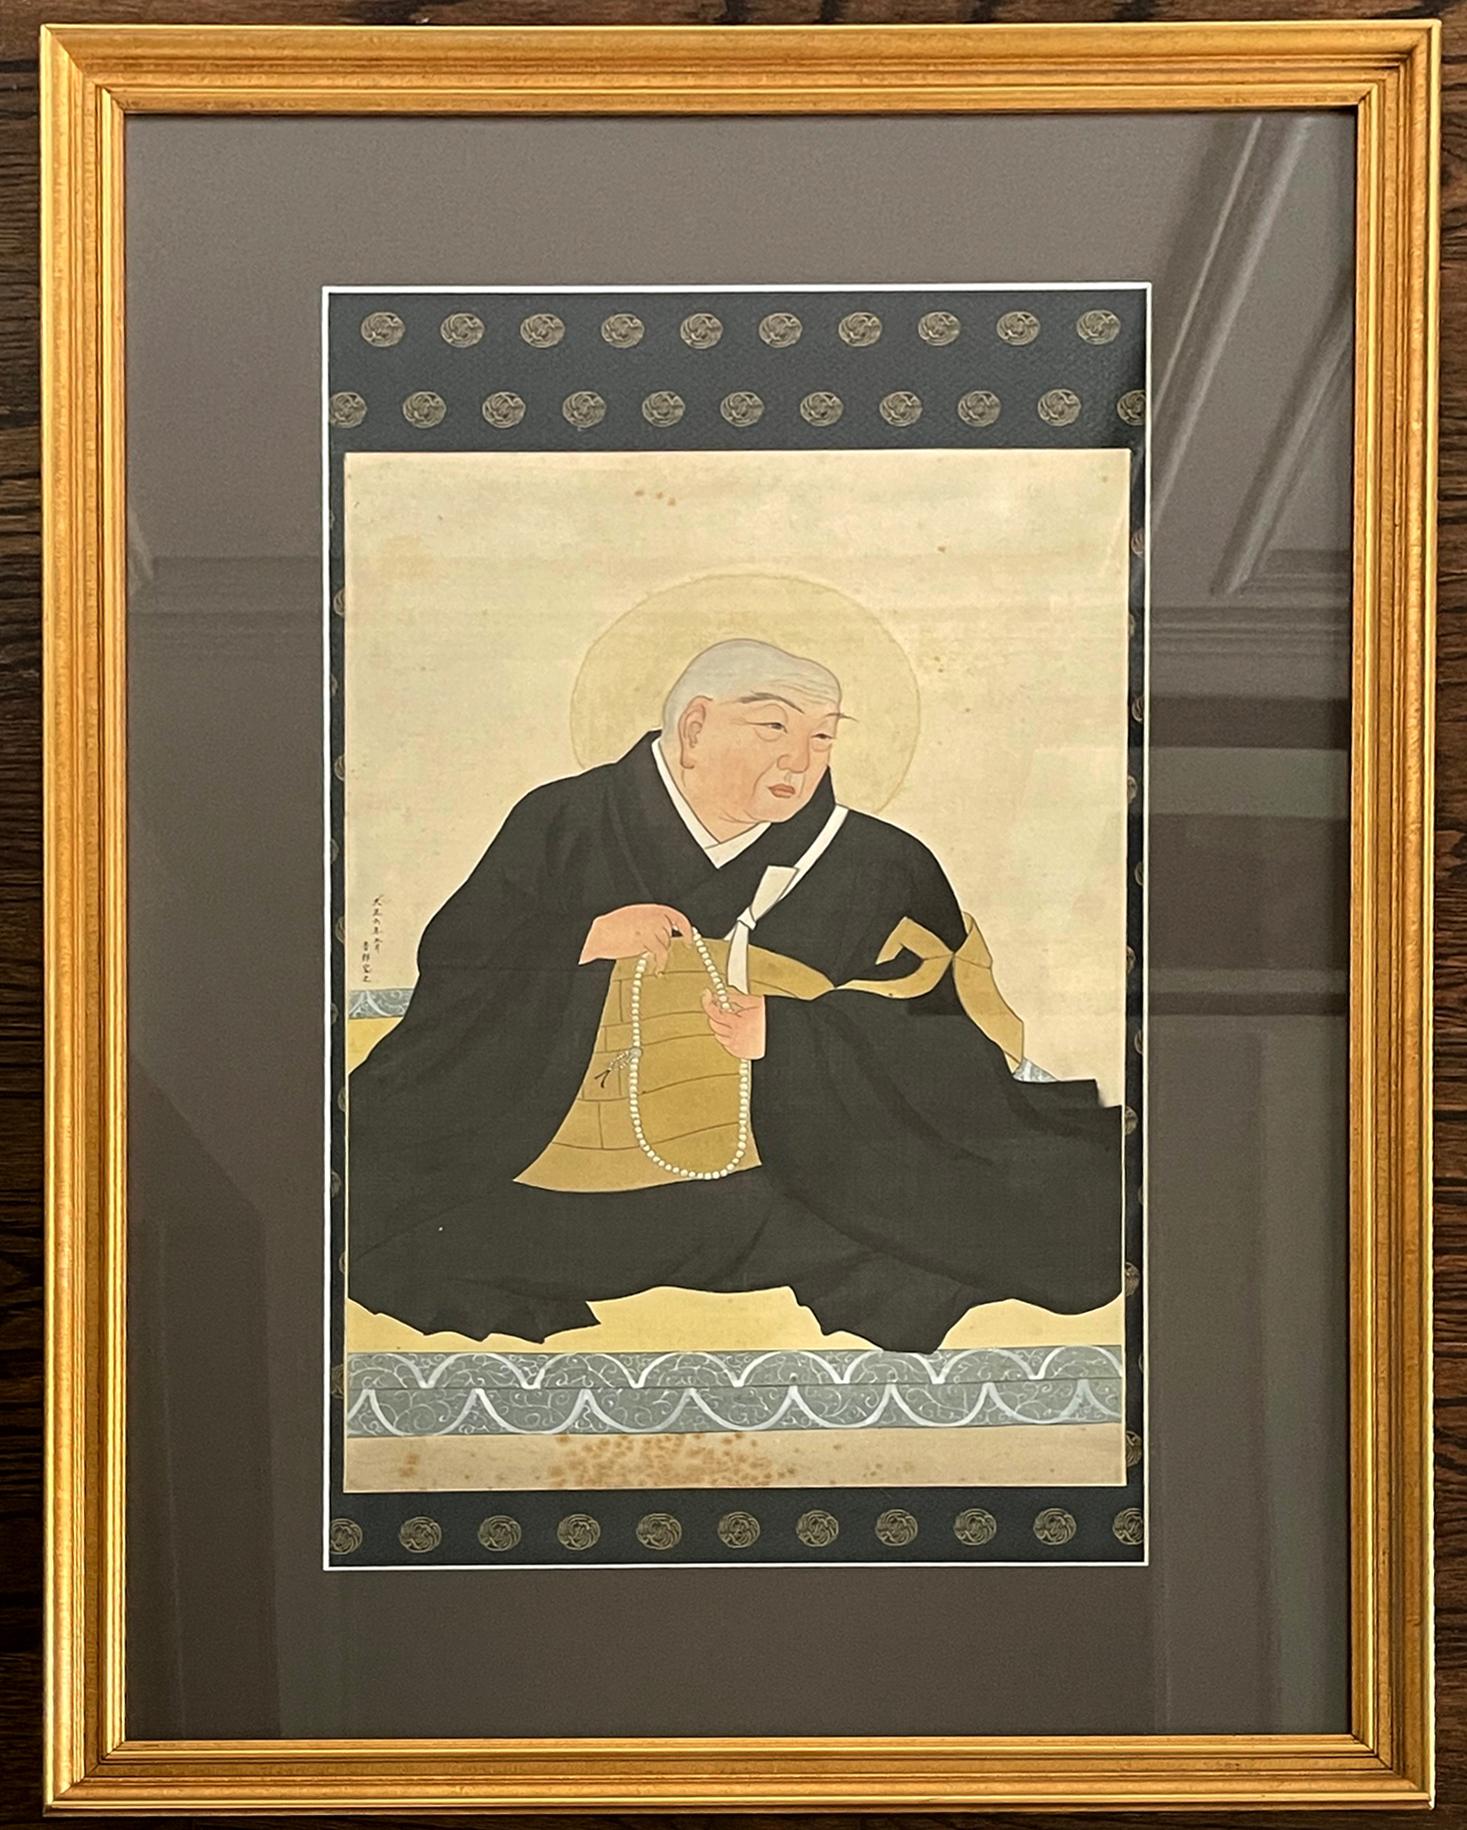 A gouache on silk painting of a Buddhist priest by Japanese painter Goro Kamenaga (1890-1955). The highly realistic painting depicts a figure in seated position, donning a Buddhist robe with a kesa tied on top and holding a string of prayer beads in